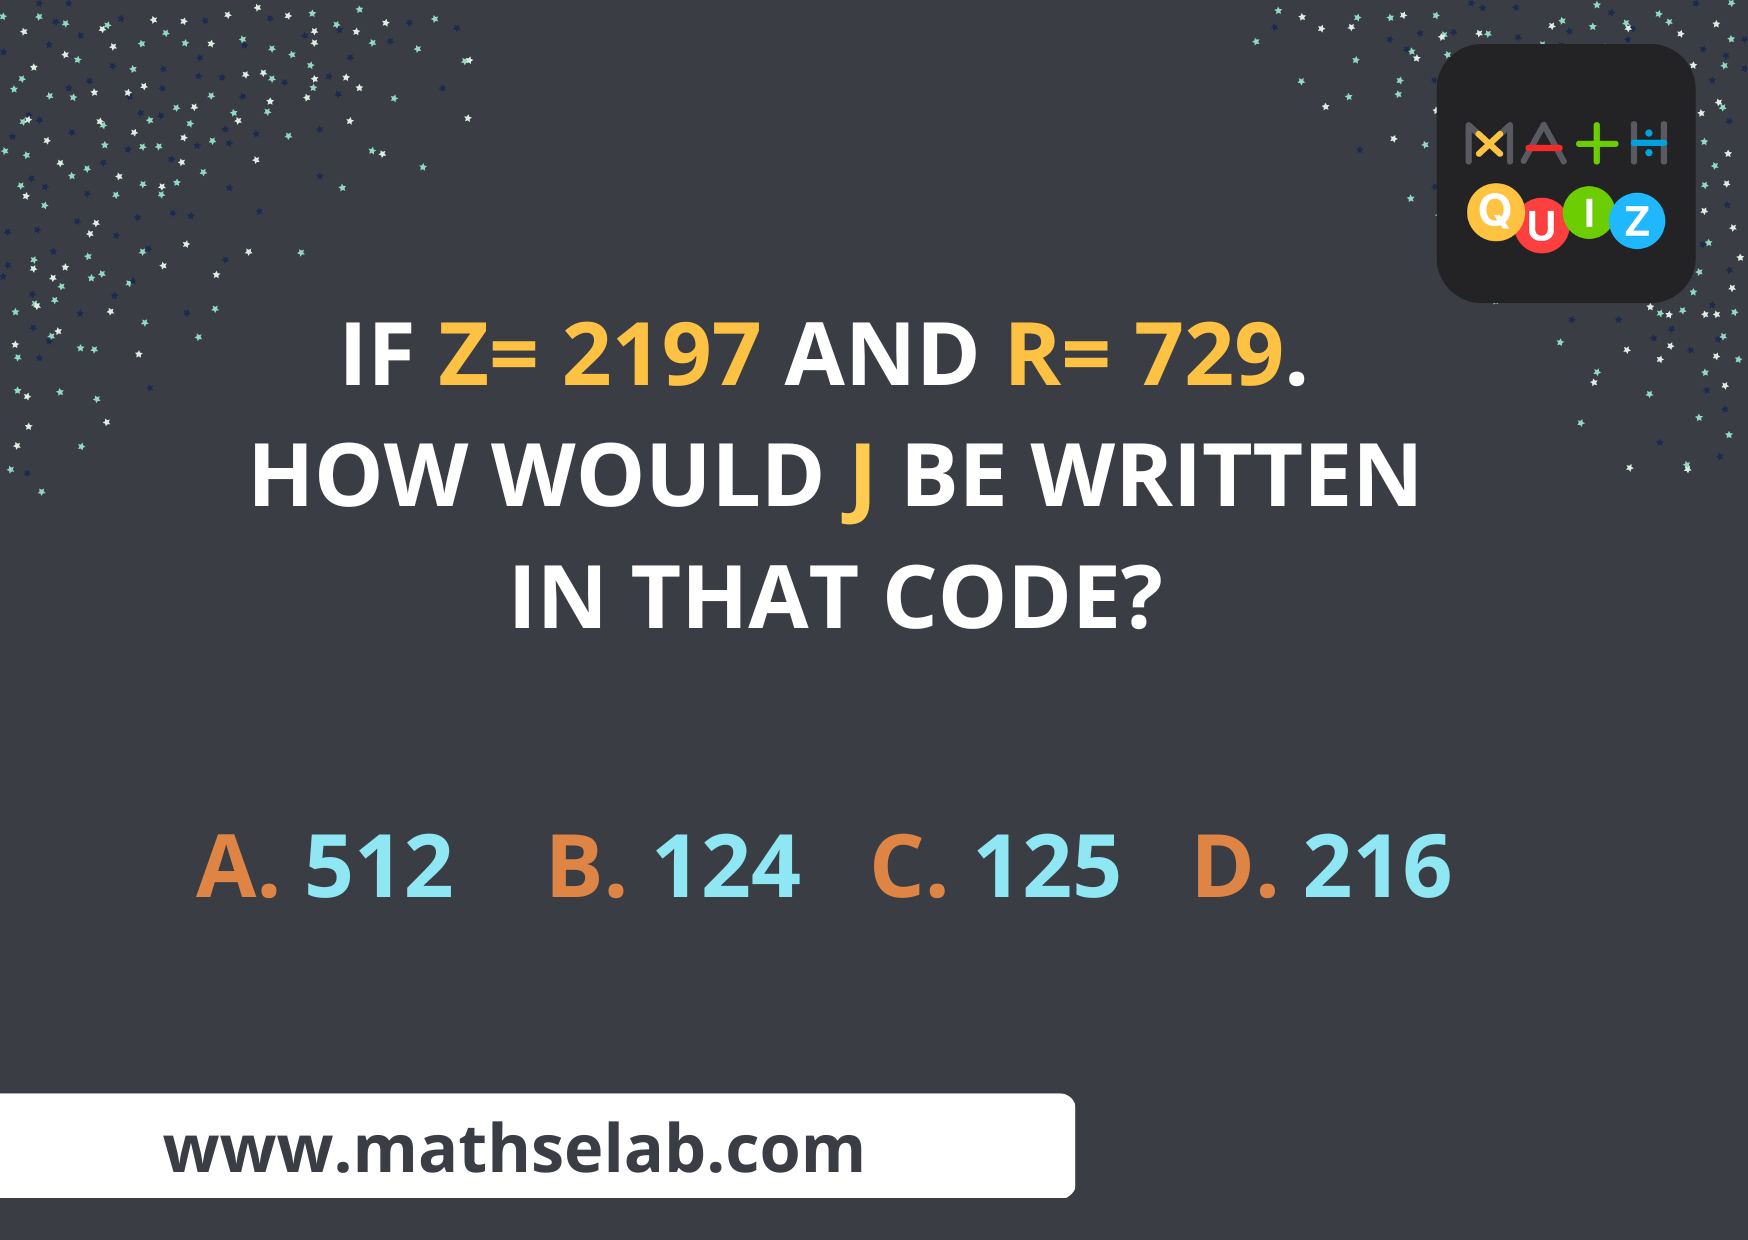 If Z= 2197 and R= 729. How would J be written in that code?